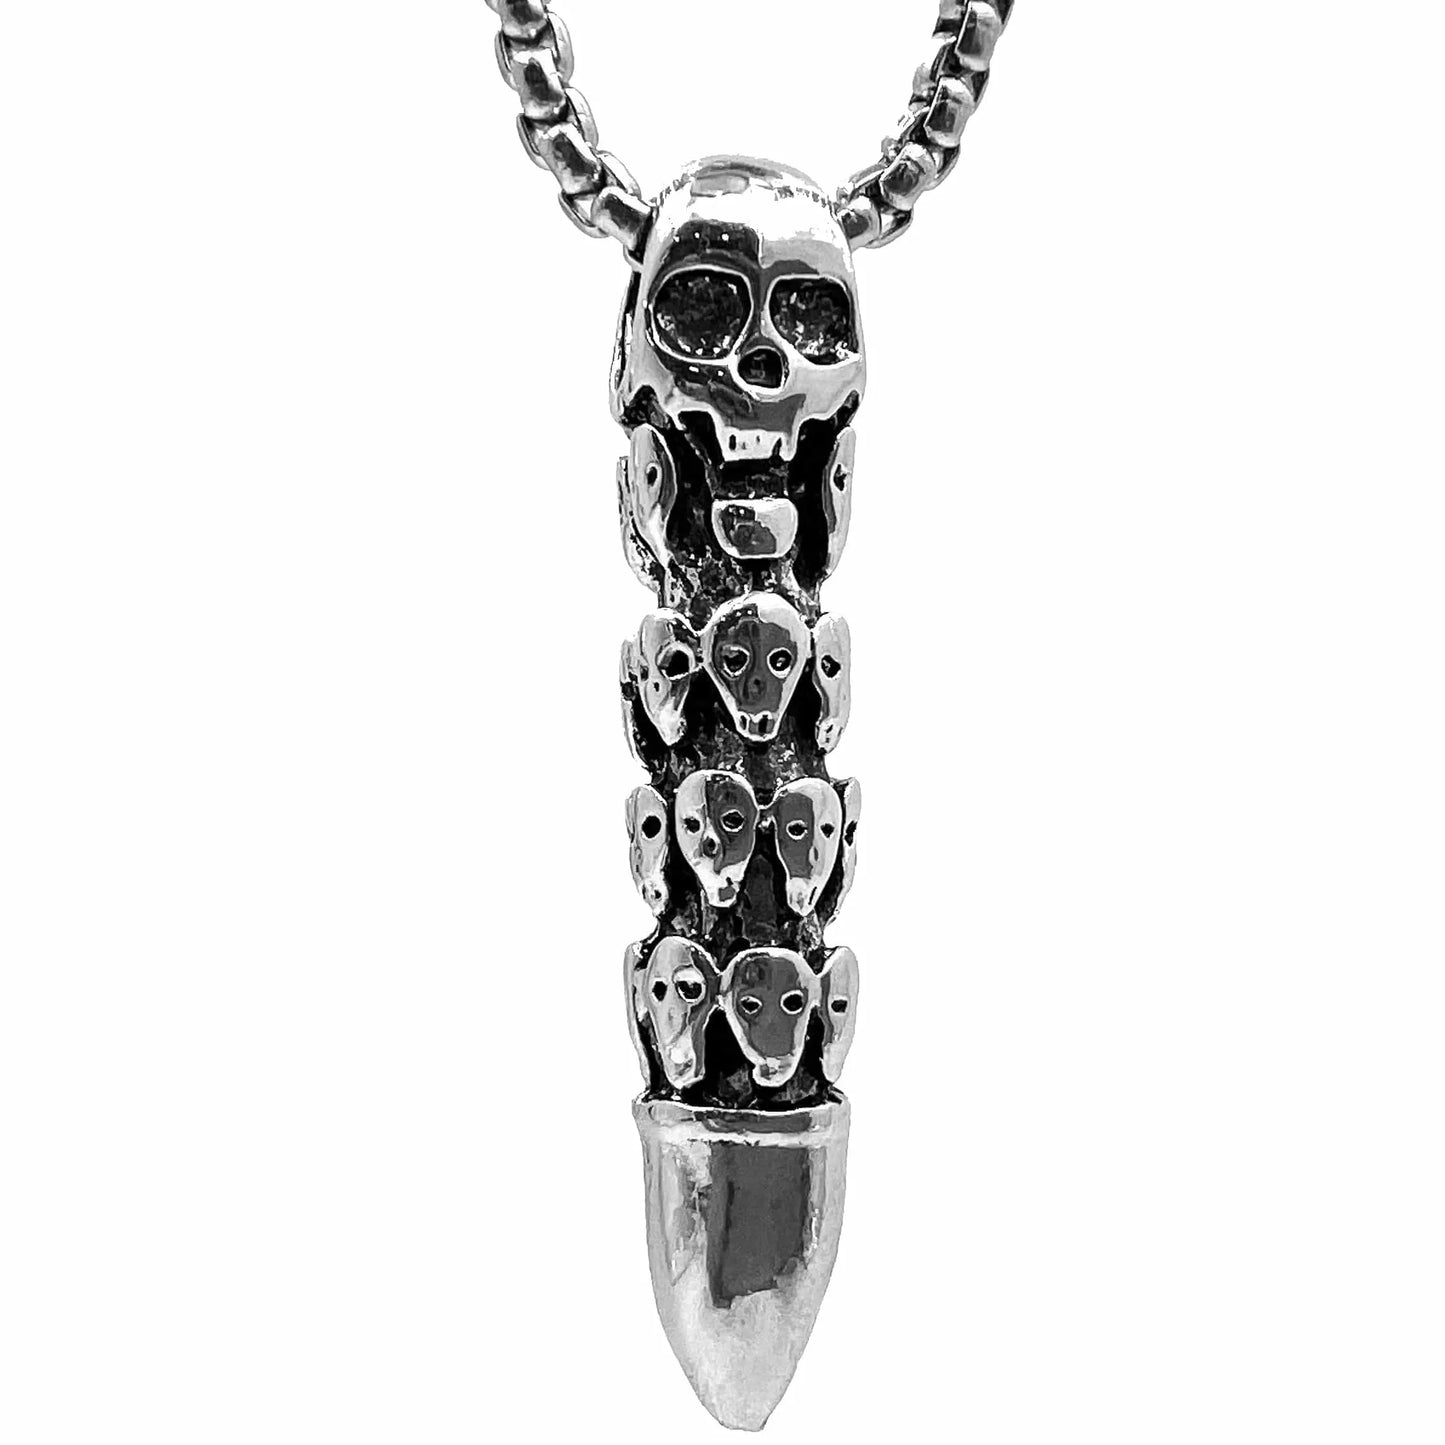 THE MEN THING Alloy Bullet Pendant with 24inch Pure Stainless Steel Chain for Men, Milan trending Style - Round Box Chain & Pendant for Men & Boy